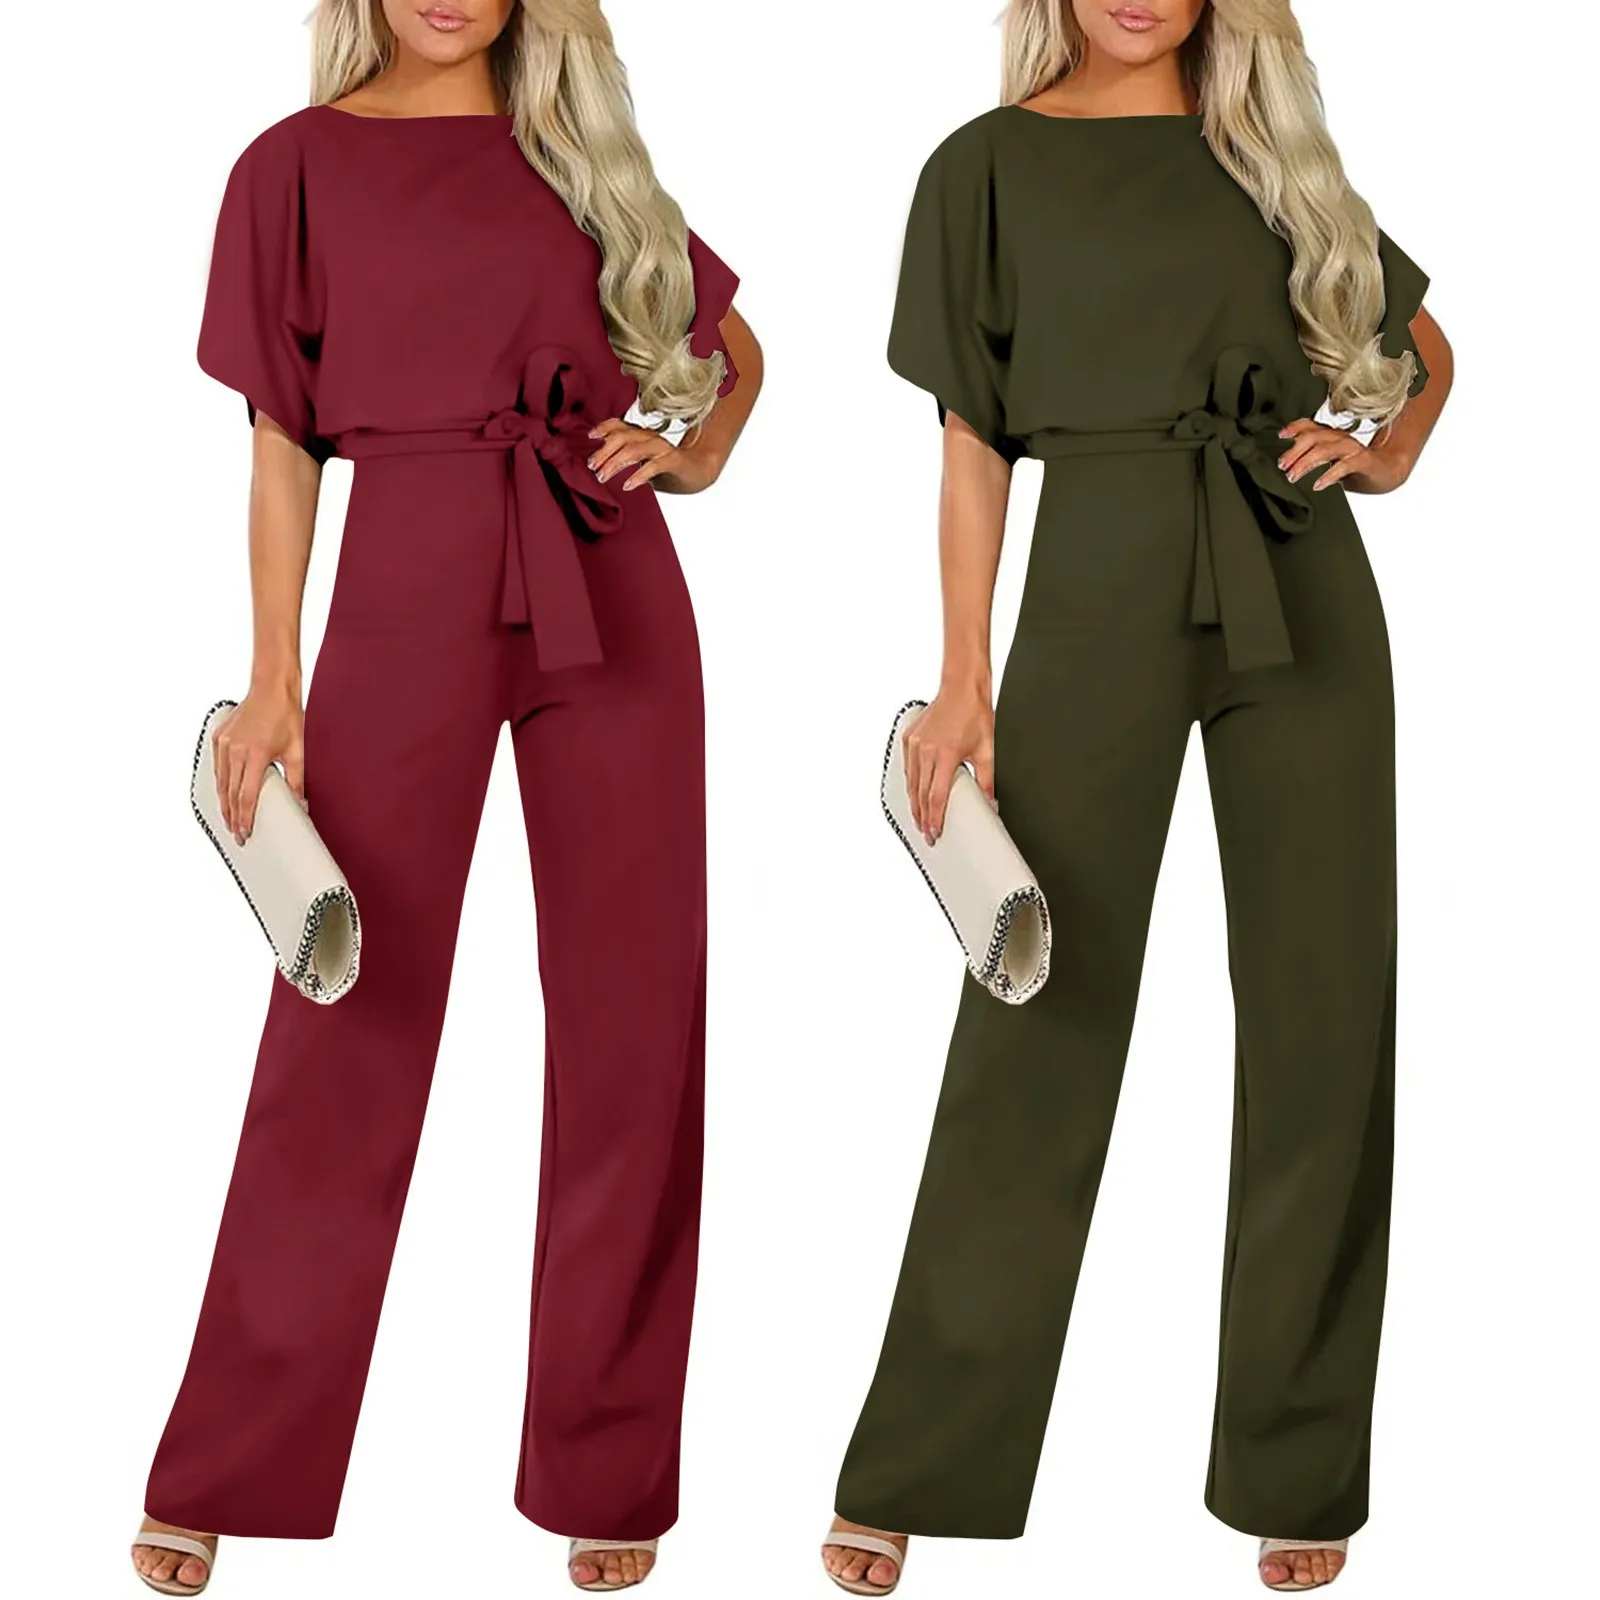 

Jumpsuit Lace Up High Waist Elegant Women Solid Color Straight Leg Romper Fashion Short-sleeved Round Neck Jumpsuit for Dating